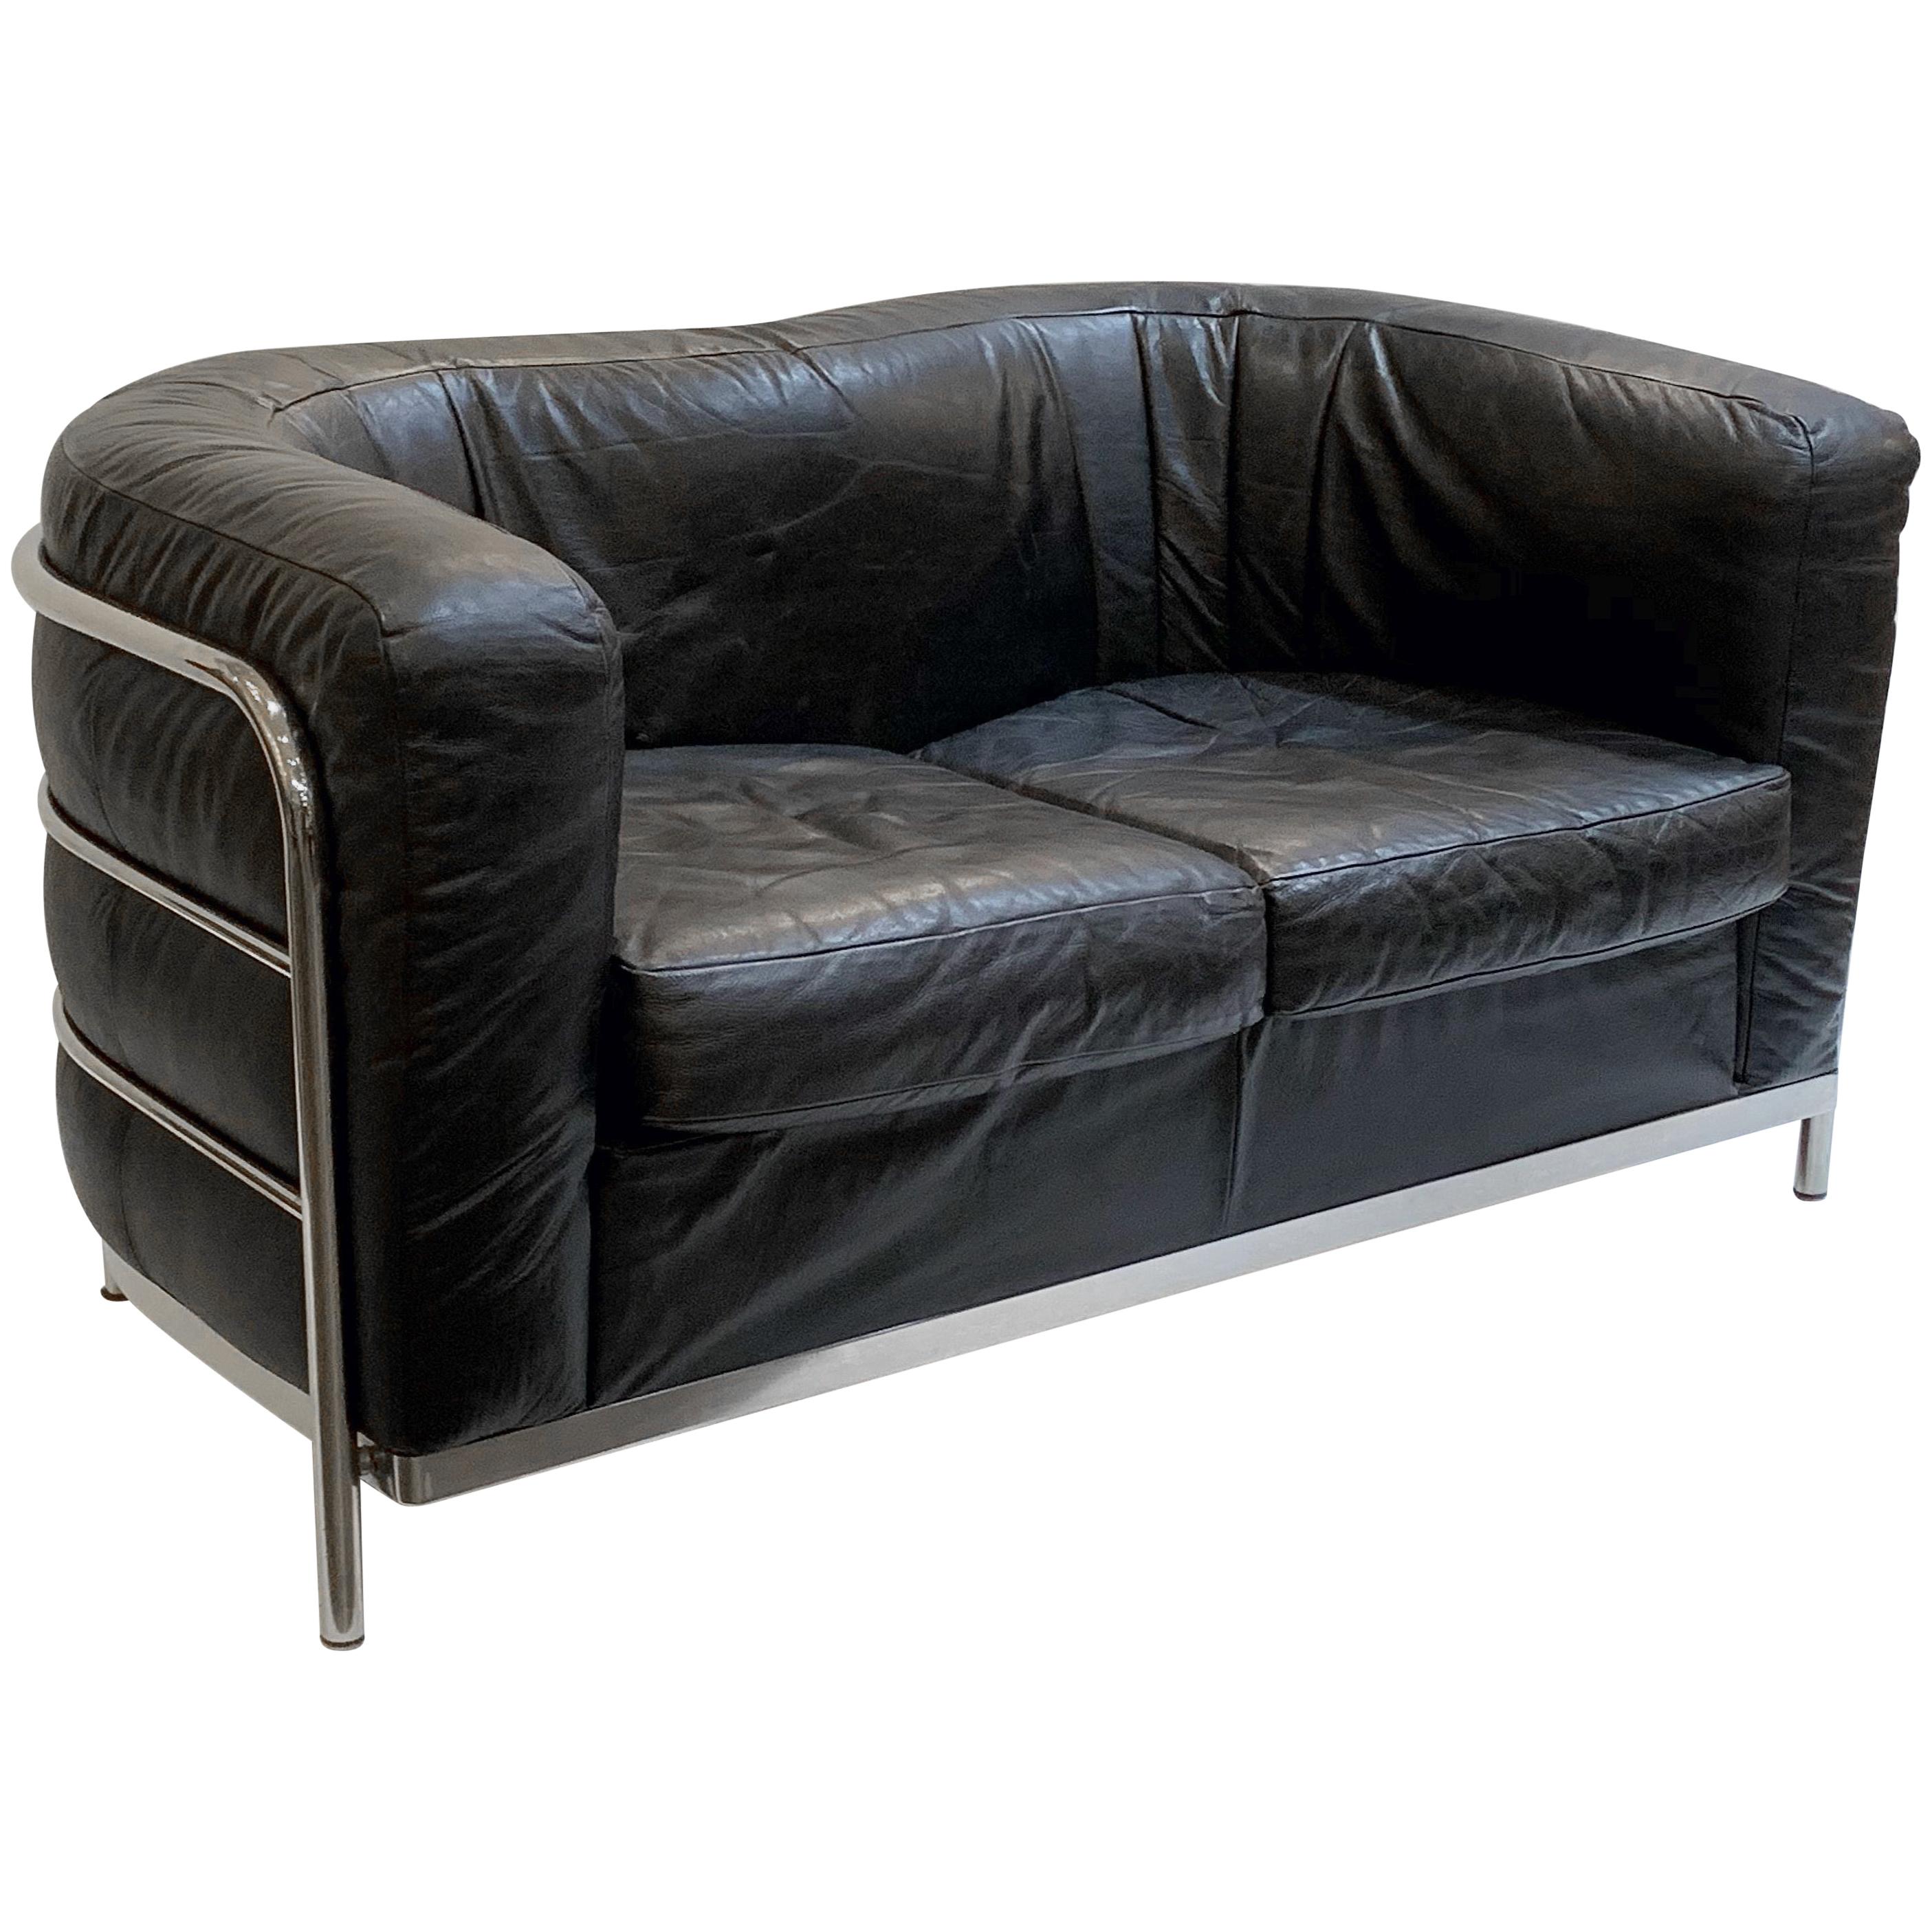 The Moderns Modernity Sofa of Chrome and Black Leather by Paolo Lomazzi